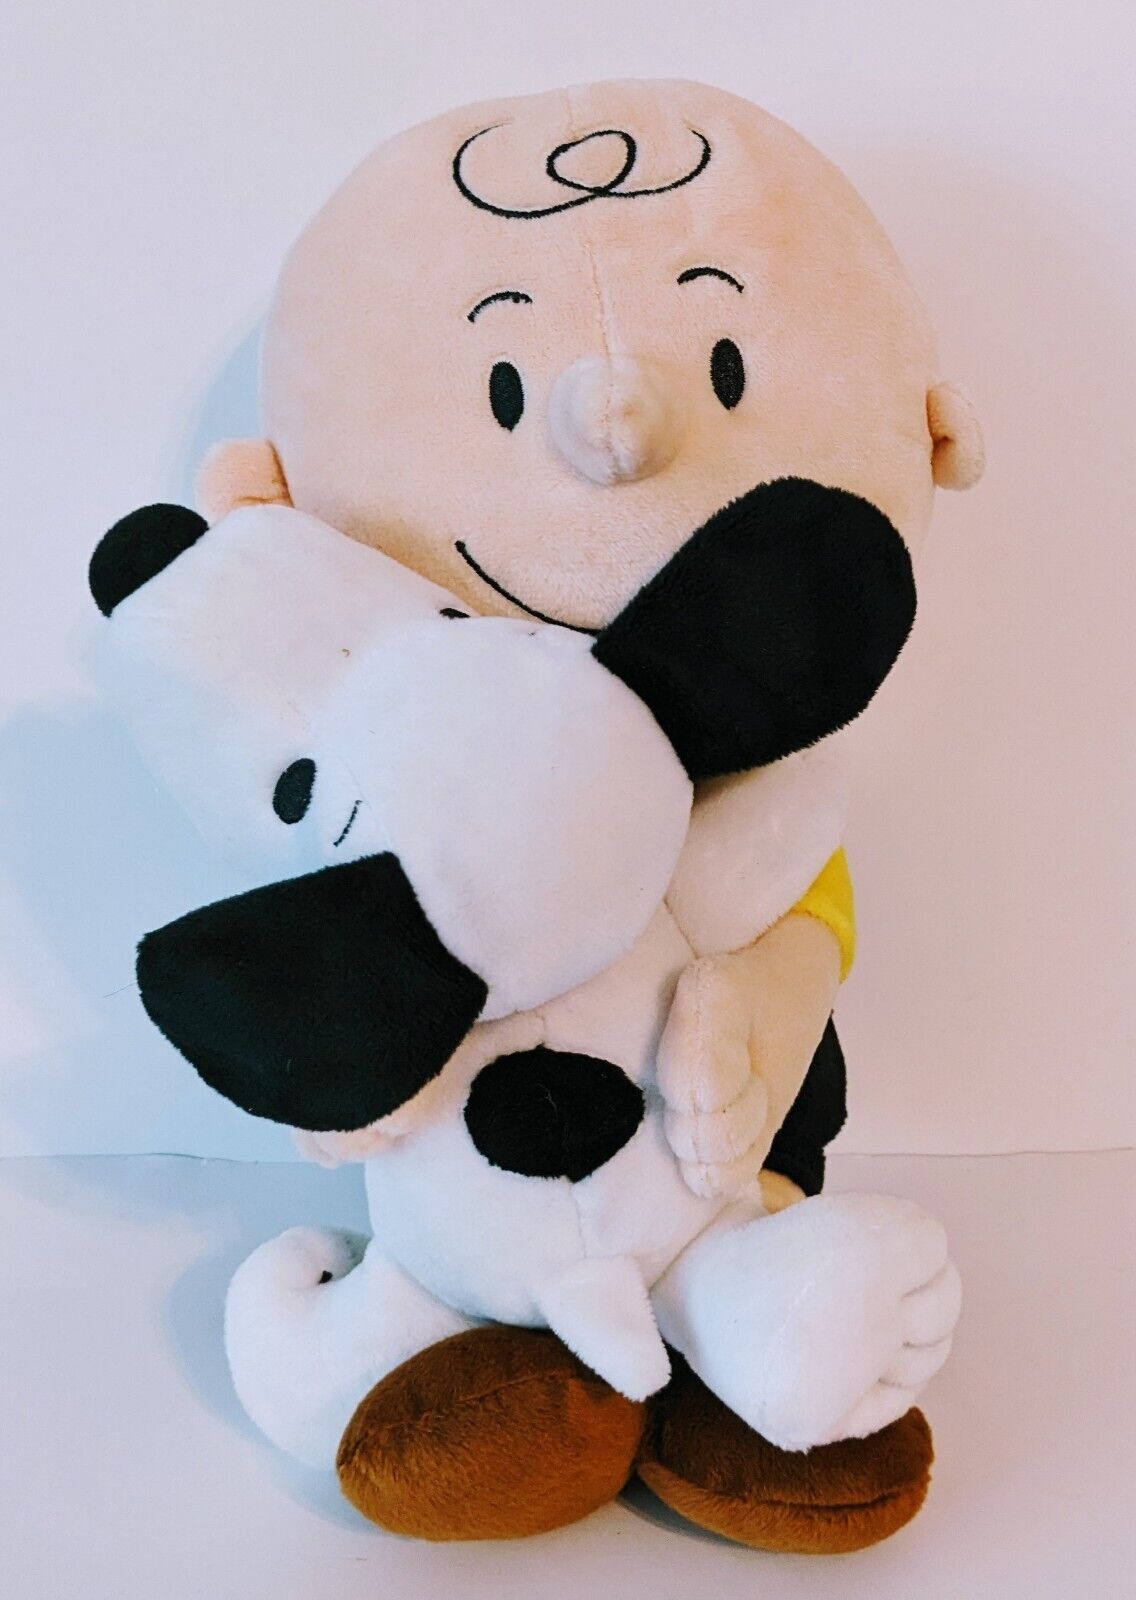 Hallmark Peanuts Charlie Brown & Snoopy “Happiness Is A Hug From A Friend” 2021